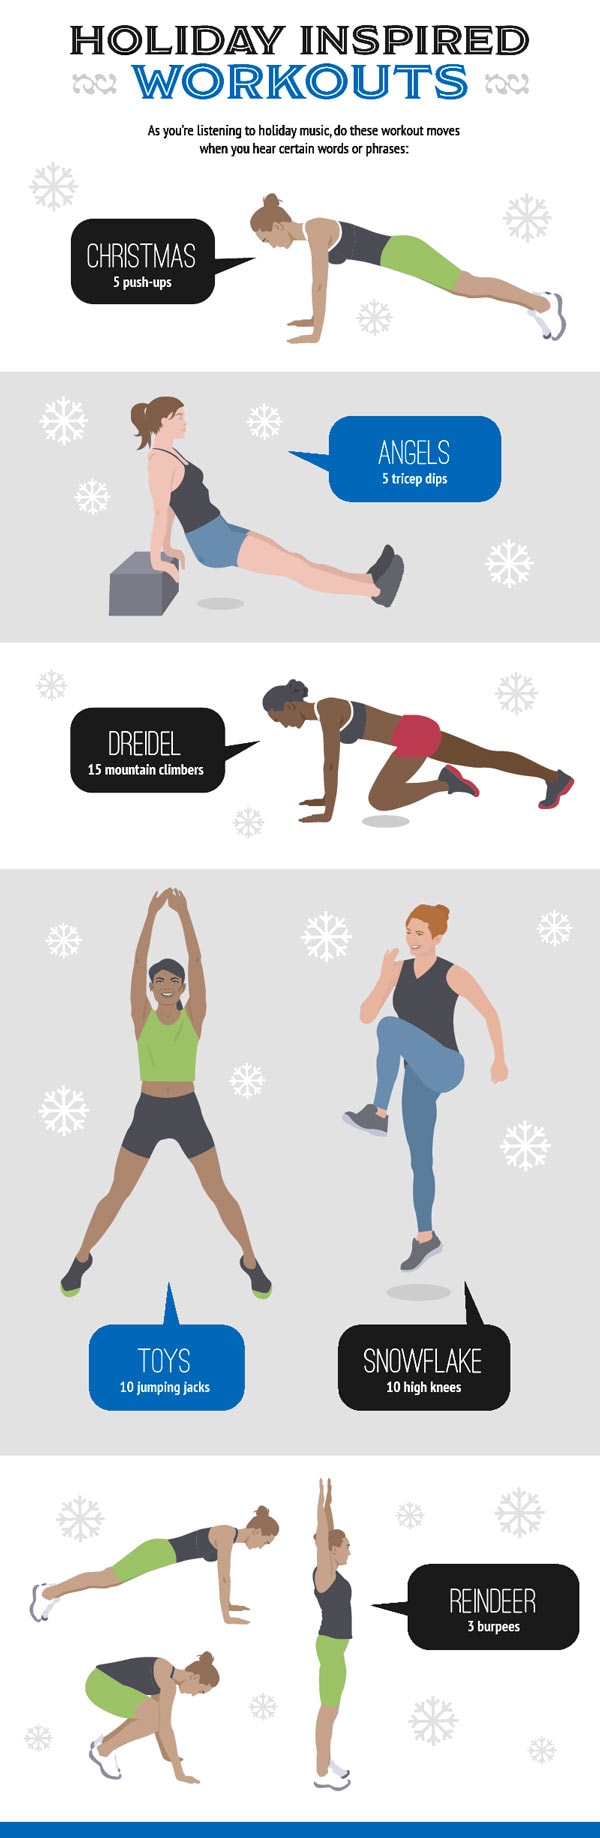 Holiday Workout Plan: 6 Ways to Stay Motivated, Blog